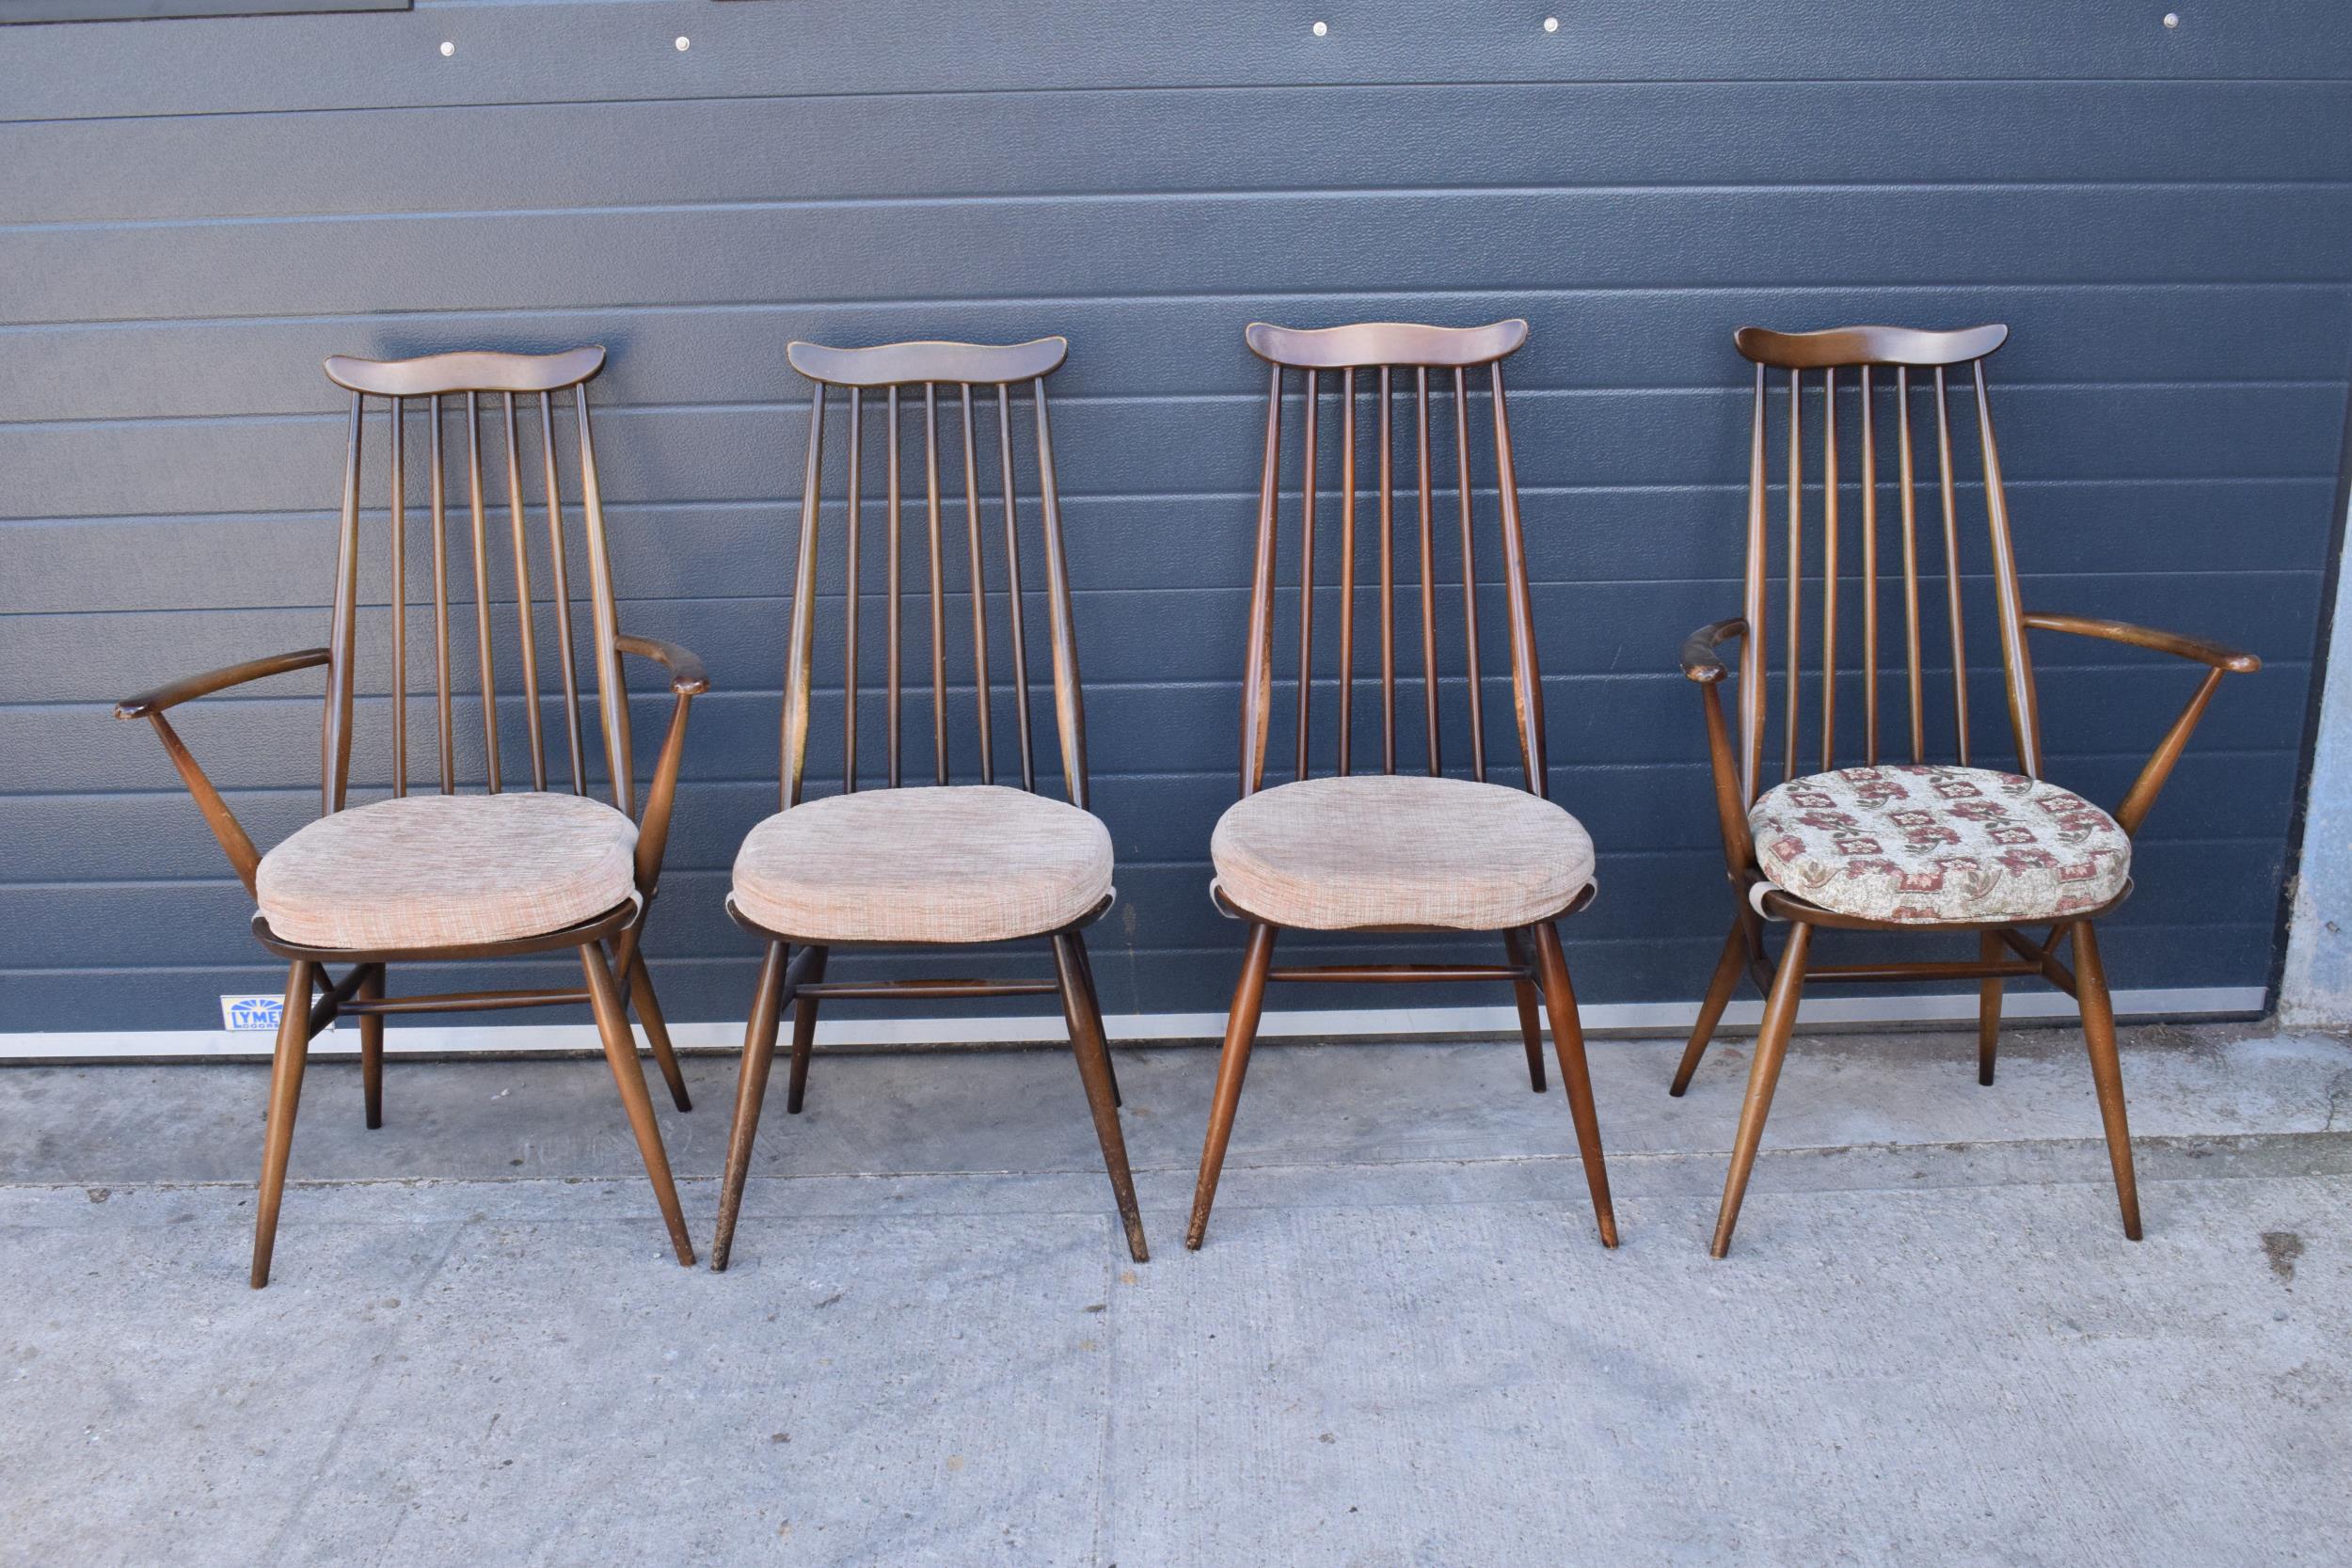 A set of 4 mid century Ercol spindle-back chairs to include 2 arm chairs (4). 97cm tall. Age-related